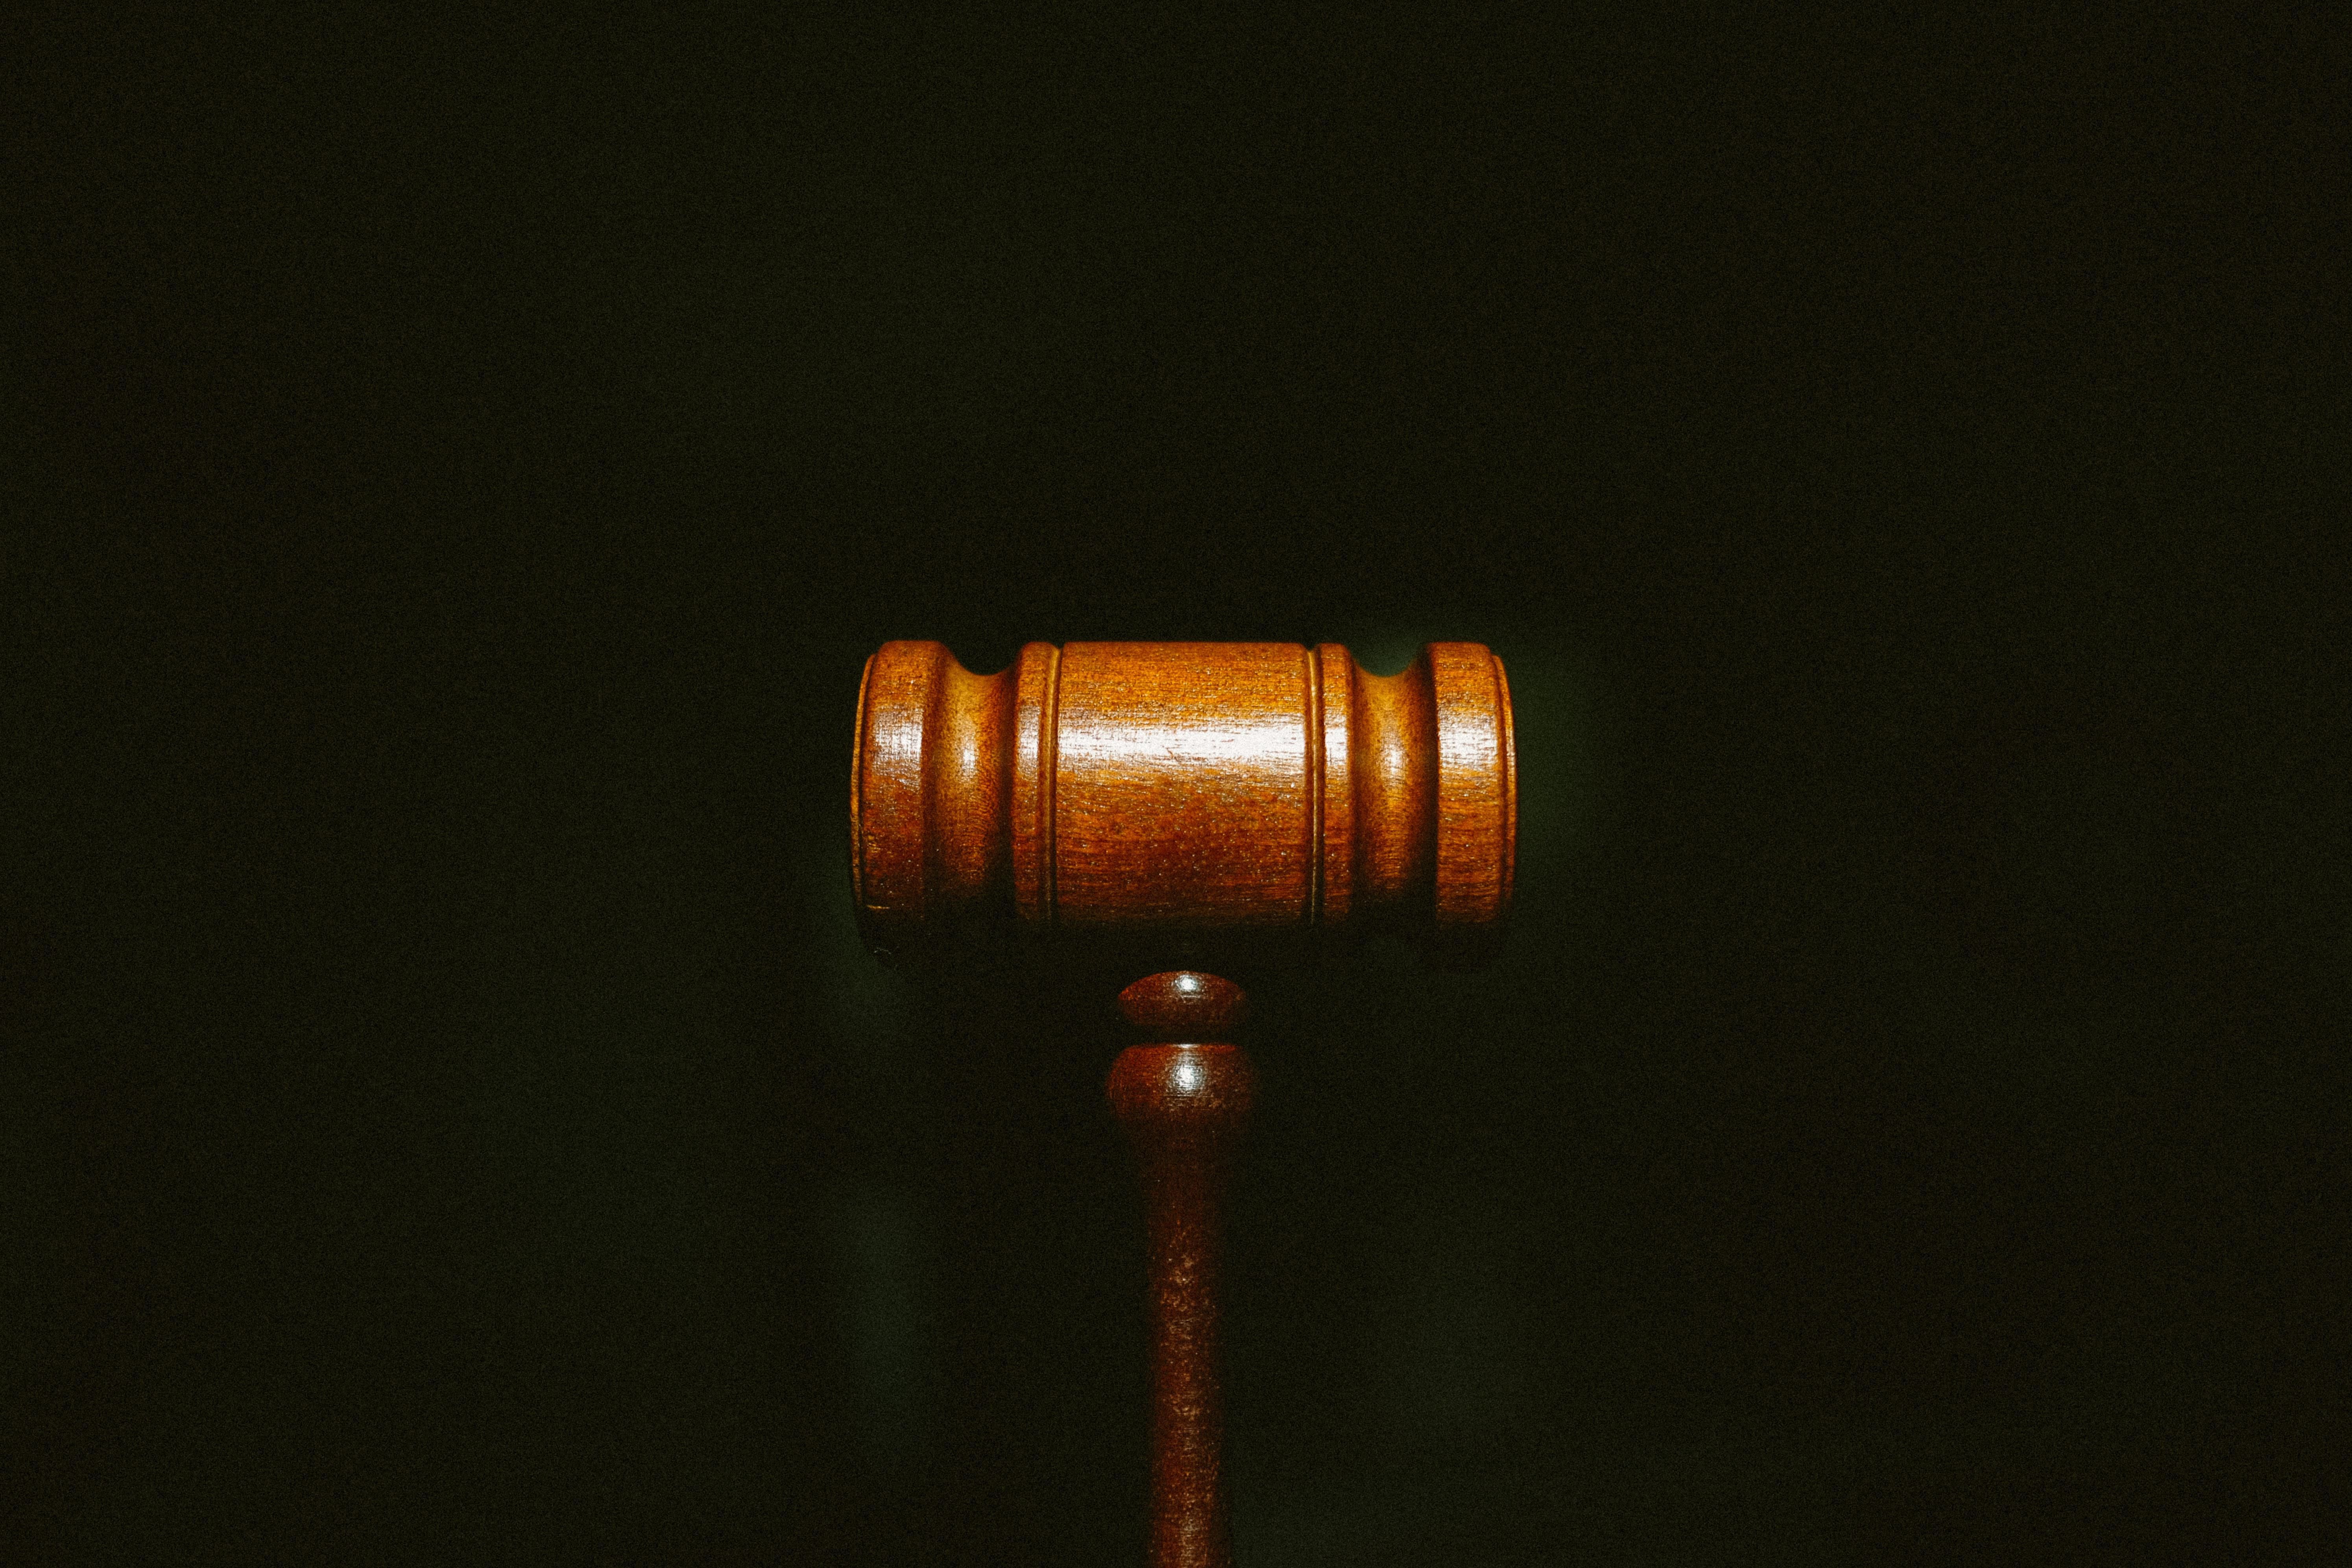 Prose: When The Gavel Falls (Story Excerpt)